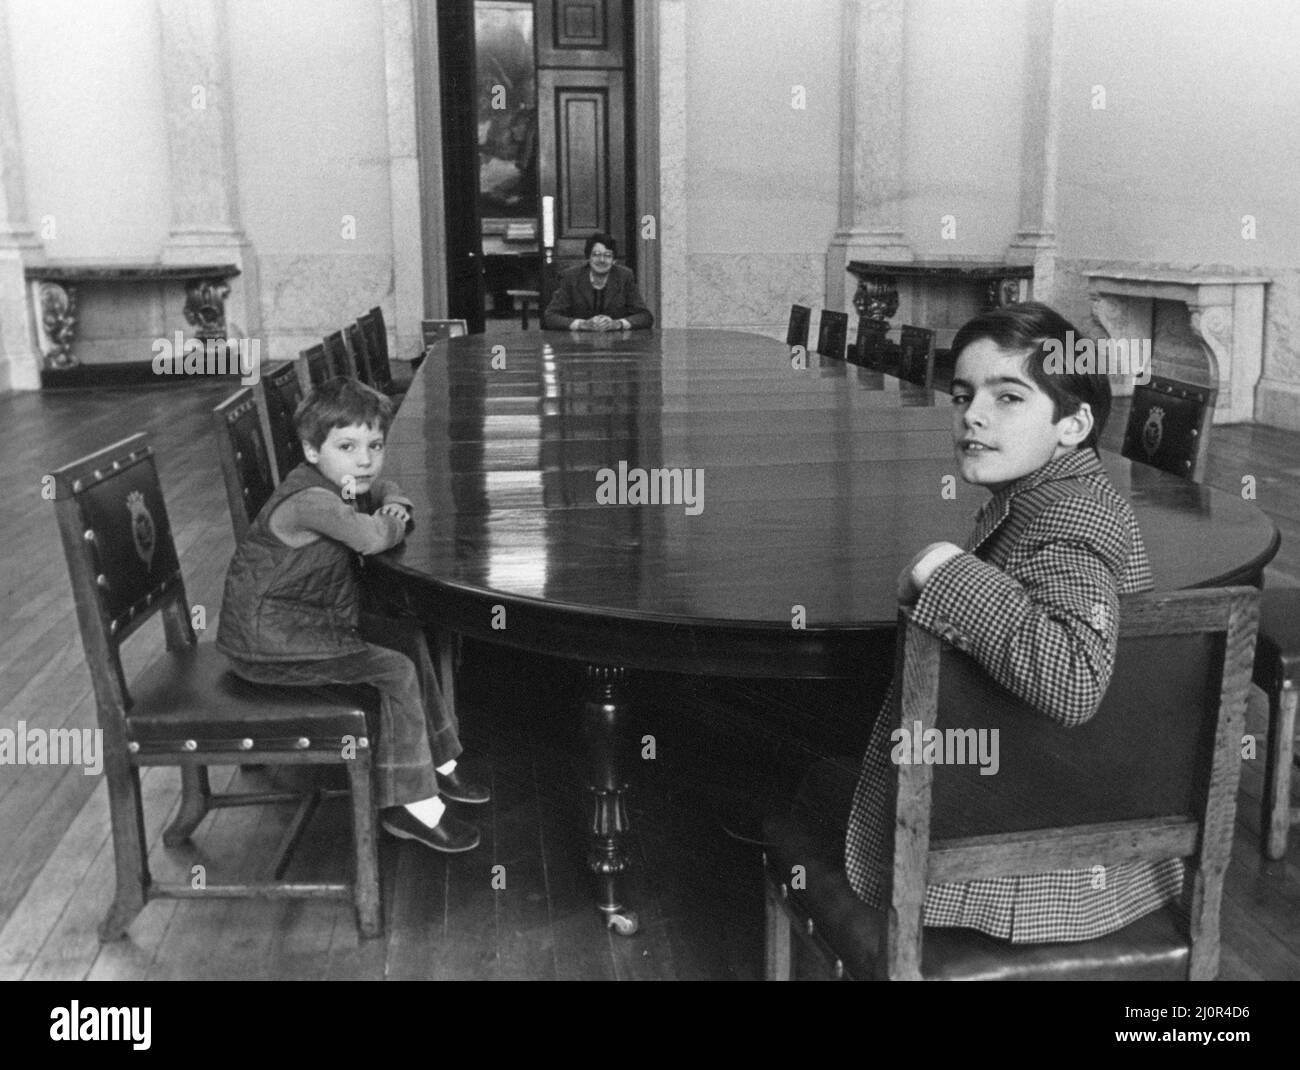 Lord Londonderry, 9th Marquess of Londonderry pictured at Wynyard Hall Estate, County Durham, 4th January 1983. Our Picture Shows ... Lord Londonderry at massive dining table with sons Frederick 10 and Reginald aged 5. Stock Photo